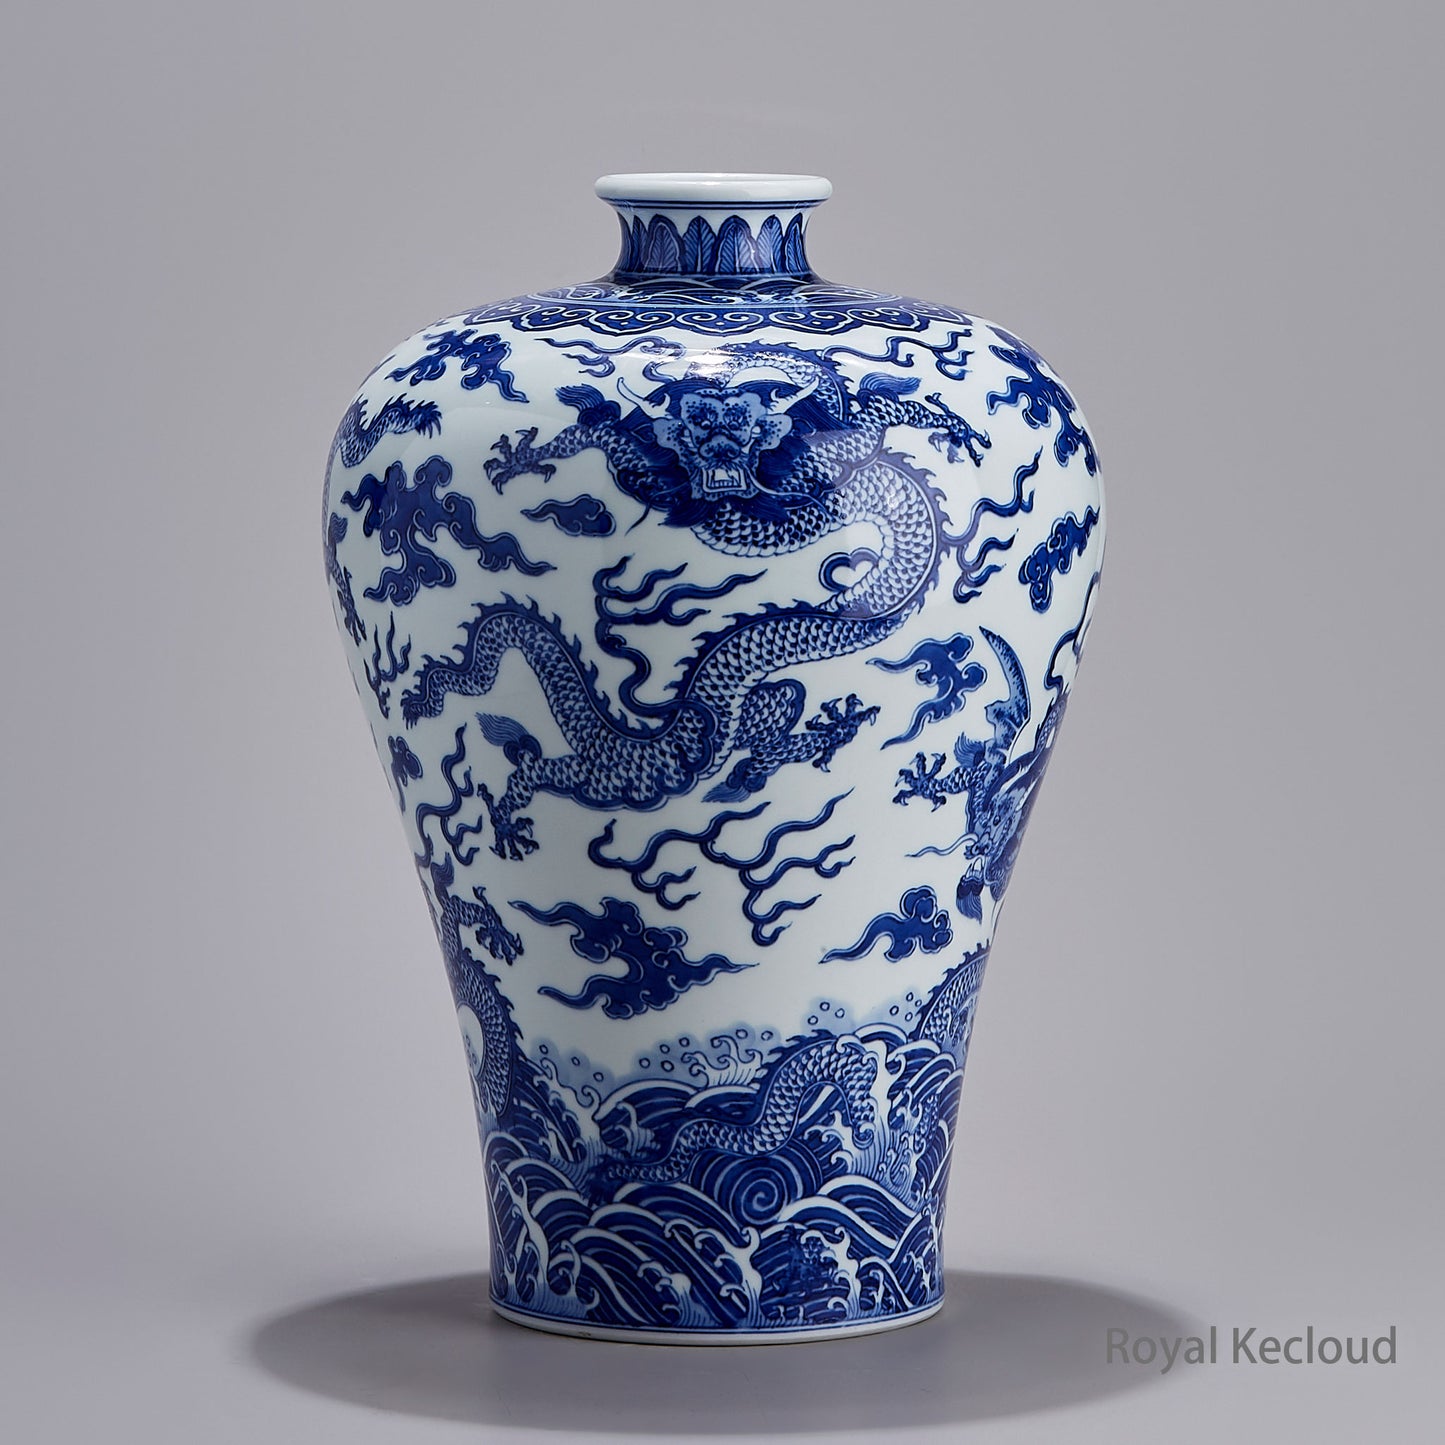 Jingdezhen Handmade Blue-and-white Porcelain Prunus Vase Decorated with dragons